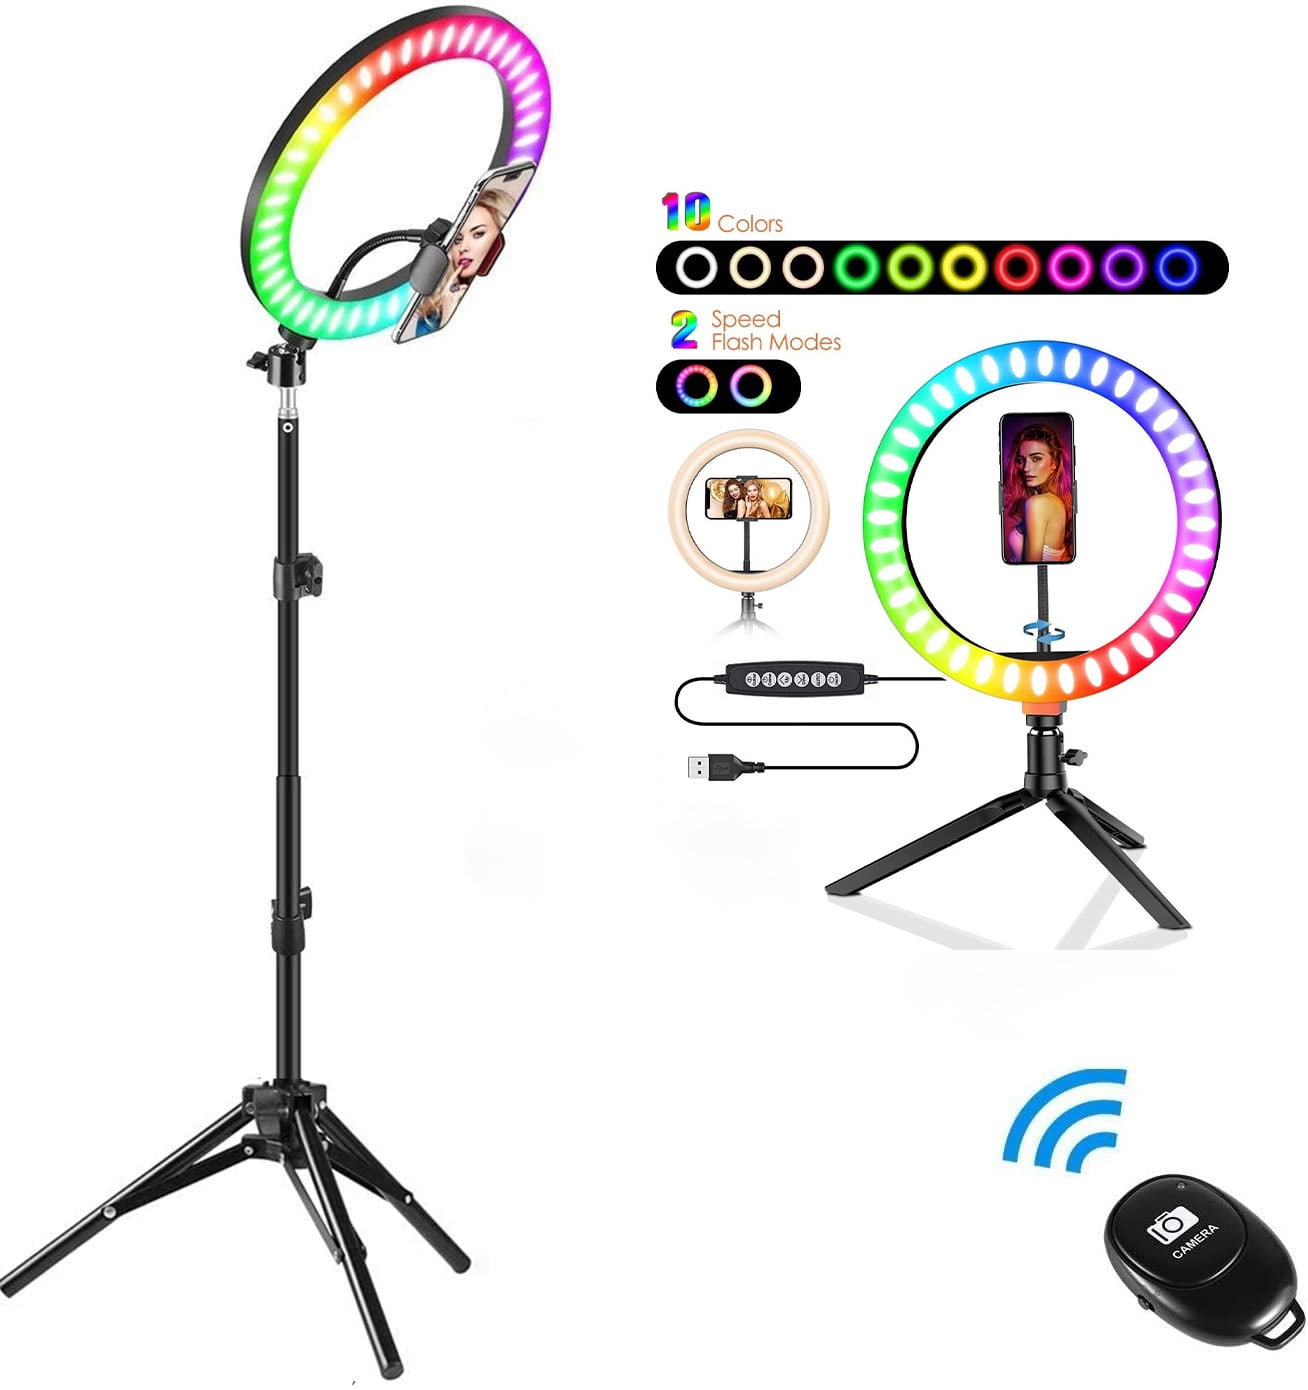 DaVoice 10 Selfie Ring Light for Desk with Table Top Tripod Stand & Cell Phone Holder Dimmable Desktop LED Circle Light for Live Streaming/Makeup/YouTube/TIK Tok/Photography Ring Light